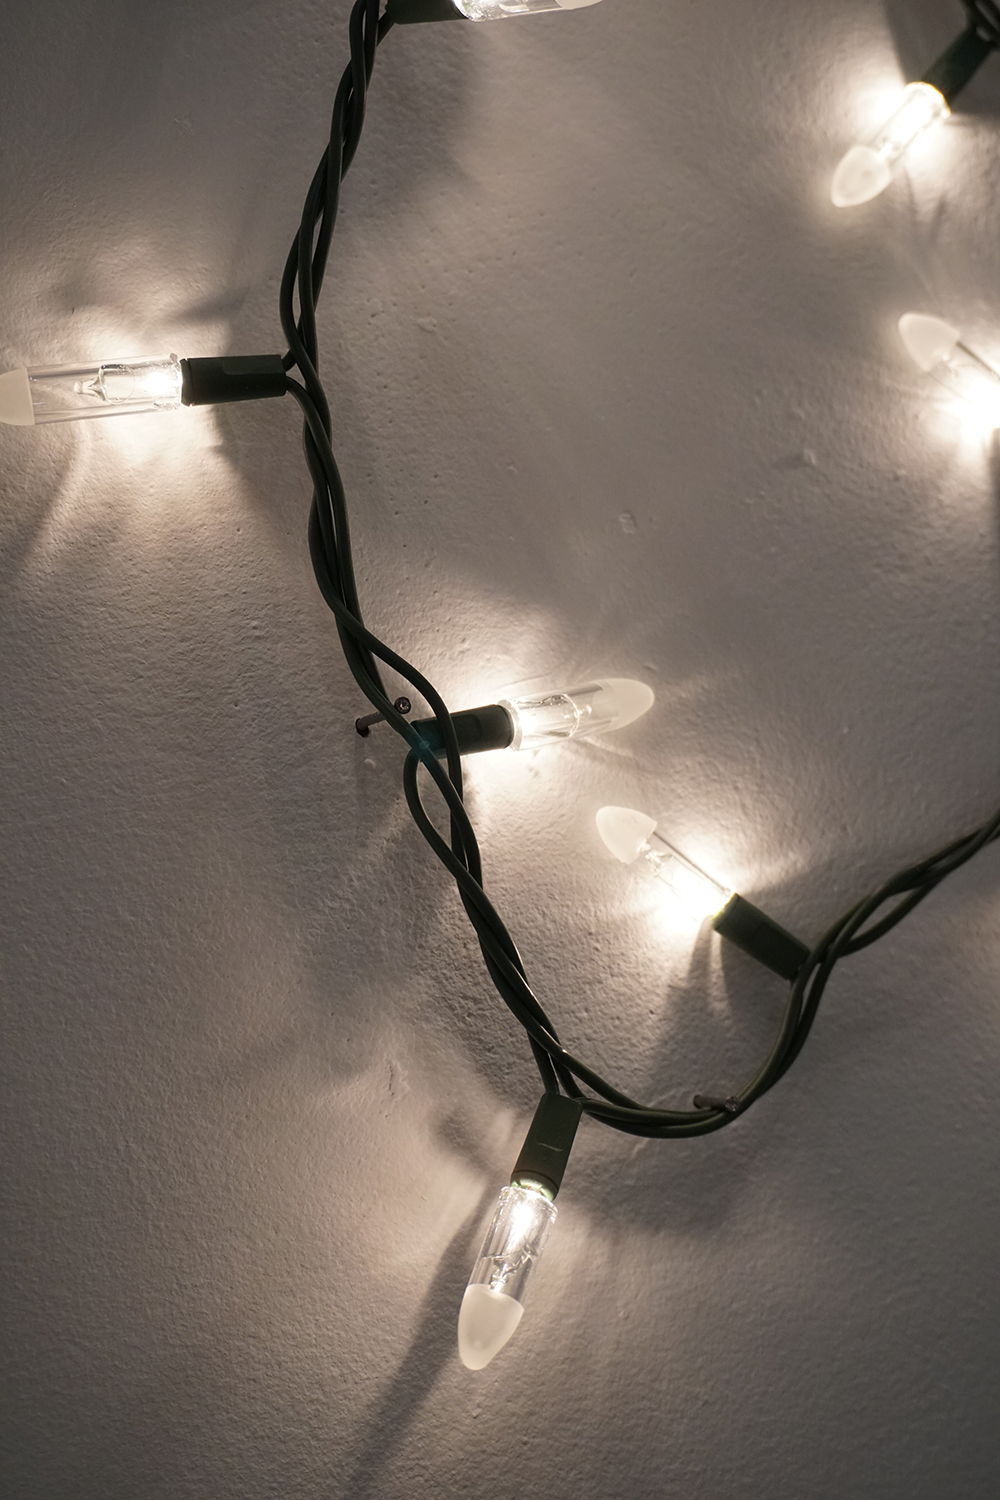 A close-up photograph of string lights showing detail of the handmade glass bulbs attached to the dark colored electrical wiring. The light from the bulbs shines and give off a warm white light.